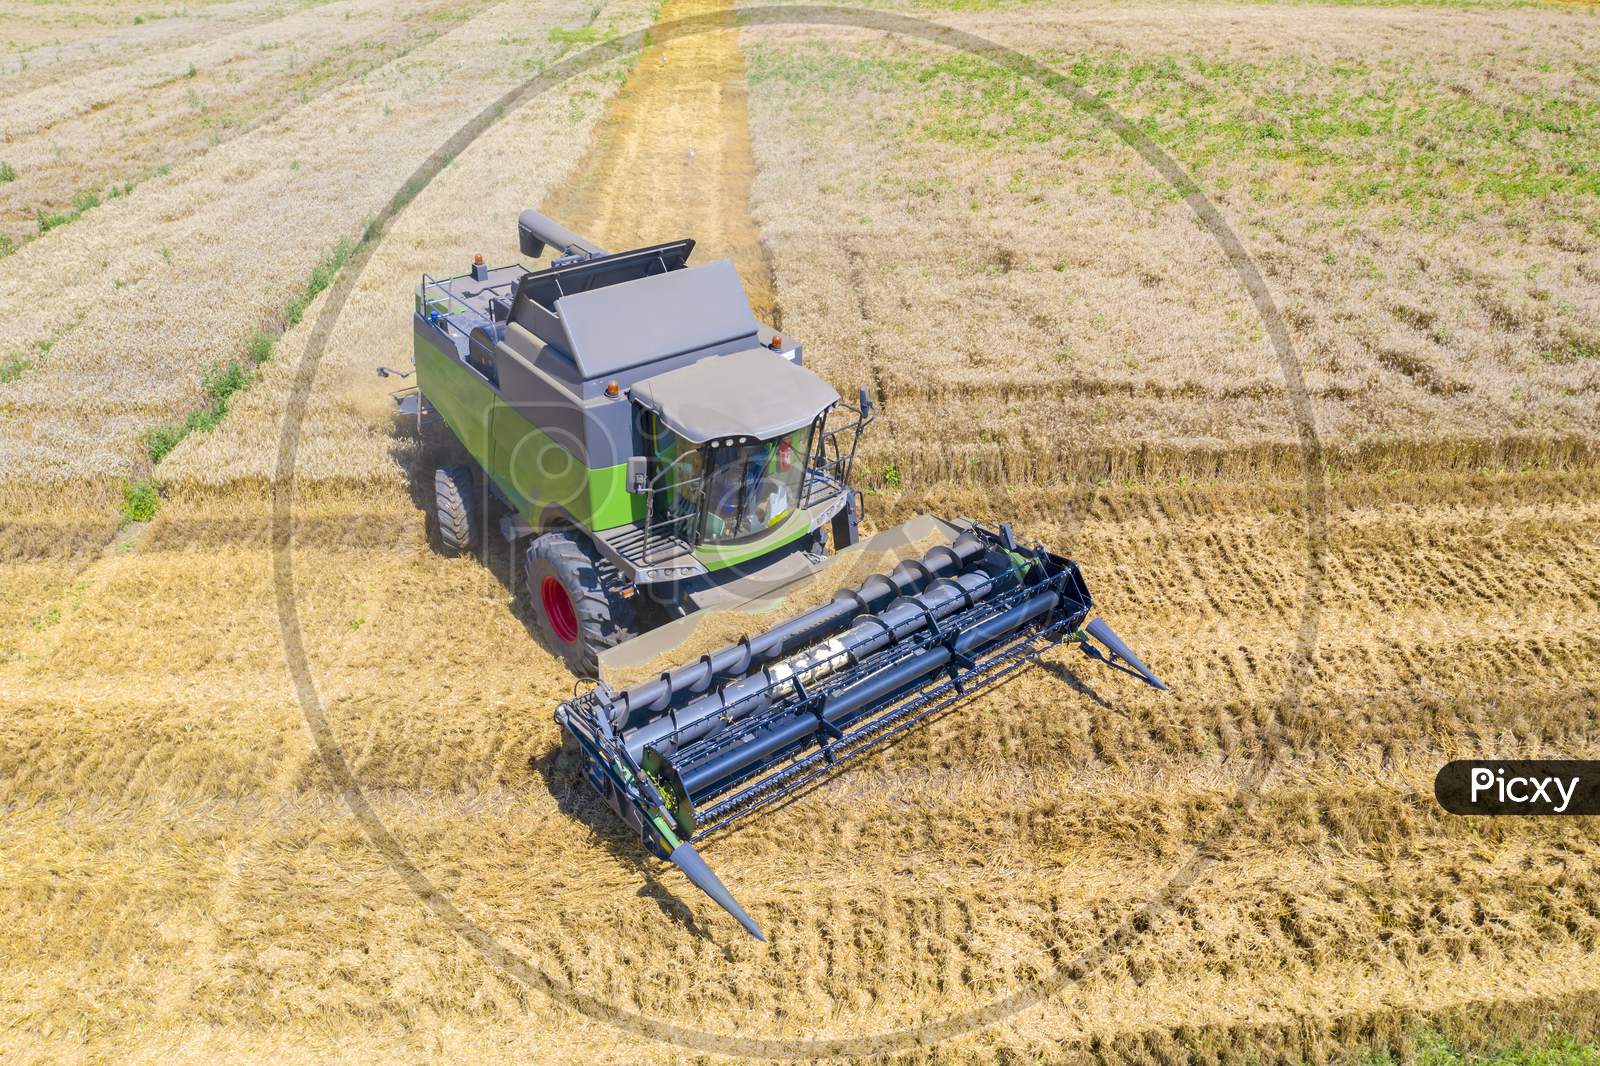 Working Combine Harvester On Wheat Field